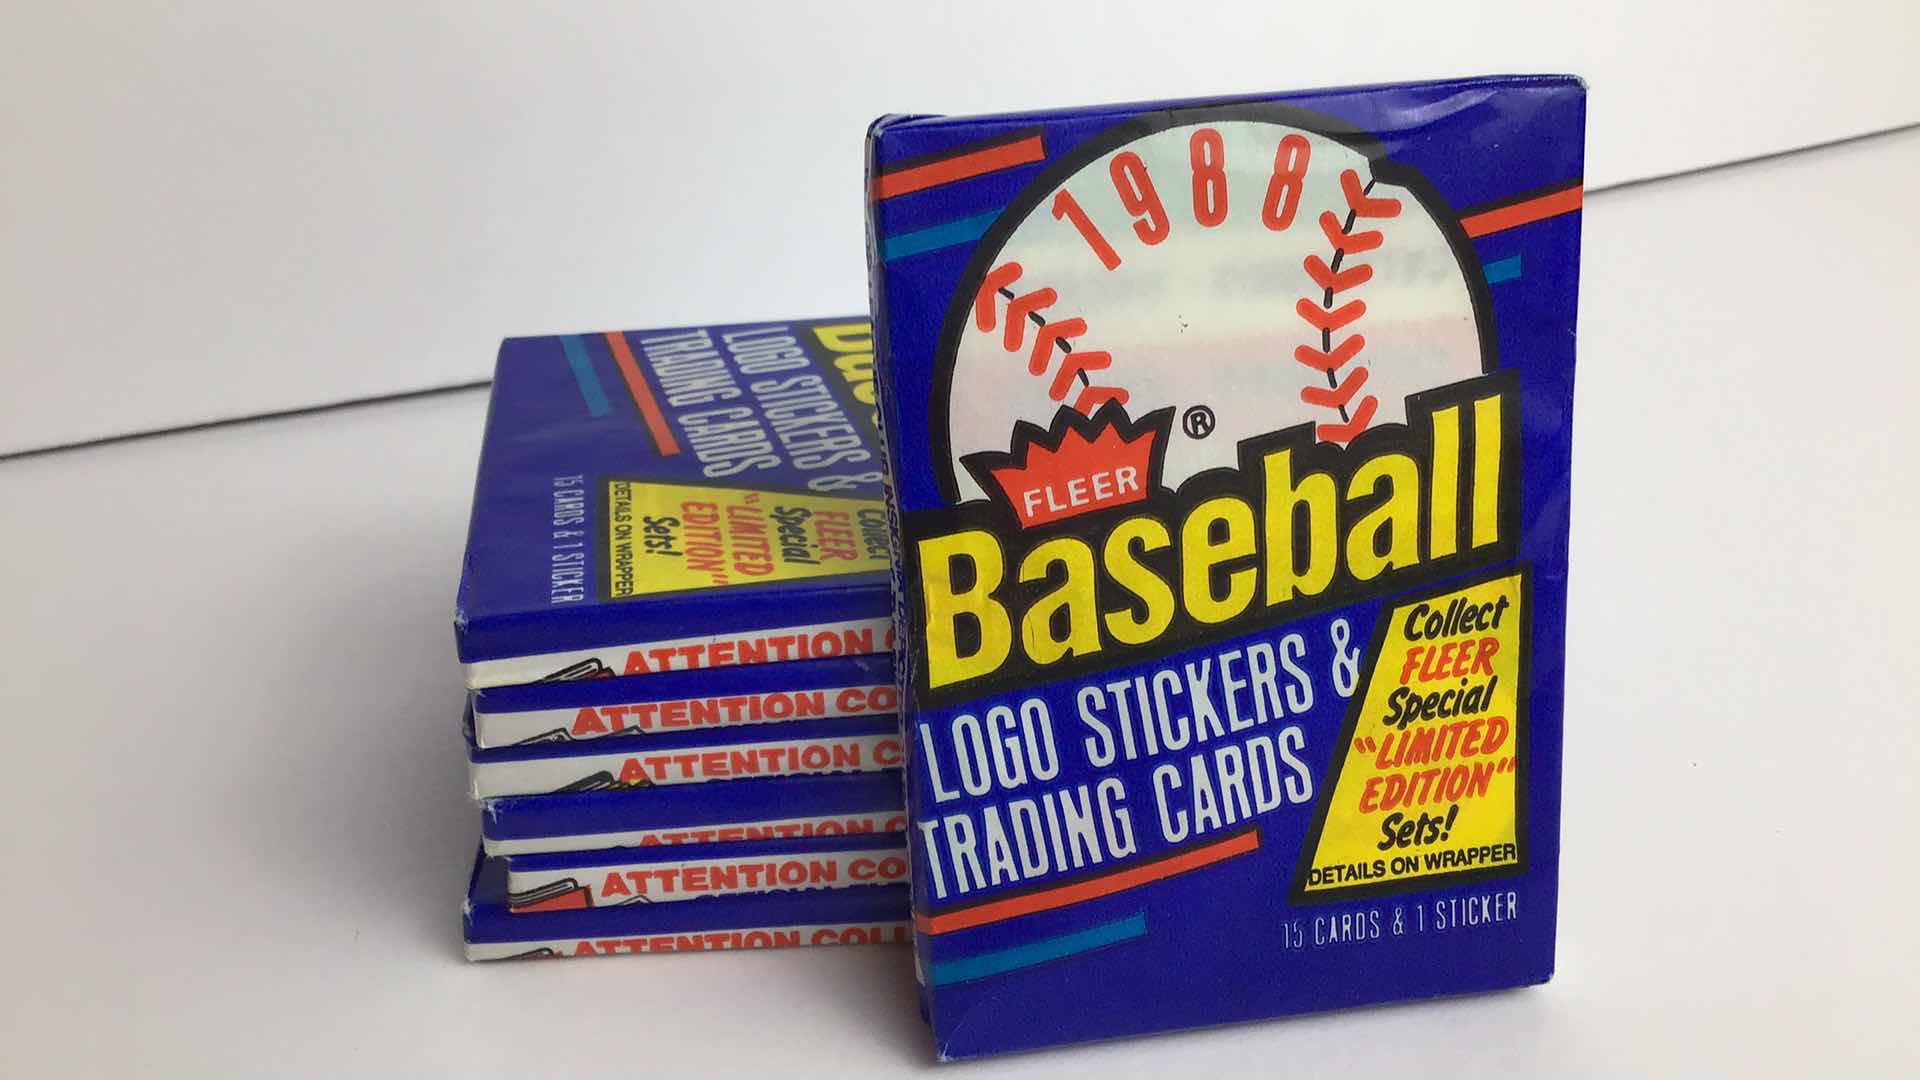 Photo 1 of $50 LOT OF 7 FLEER ‘88 LOGO STICKERS & TRADING CARDS SEALED PACKS*